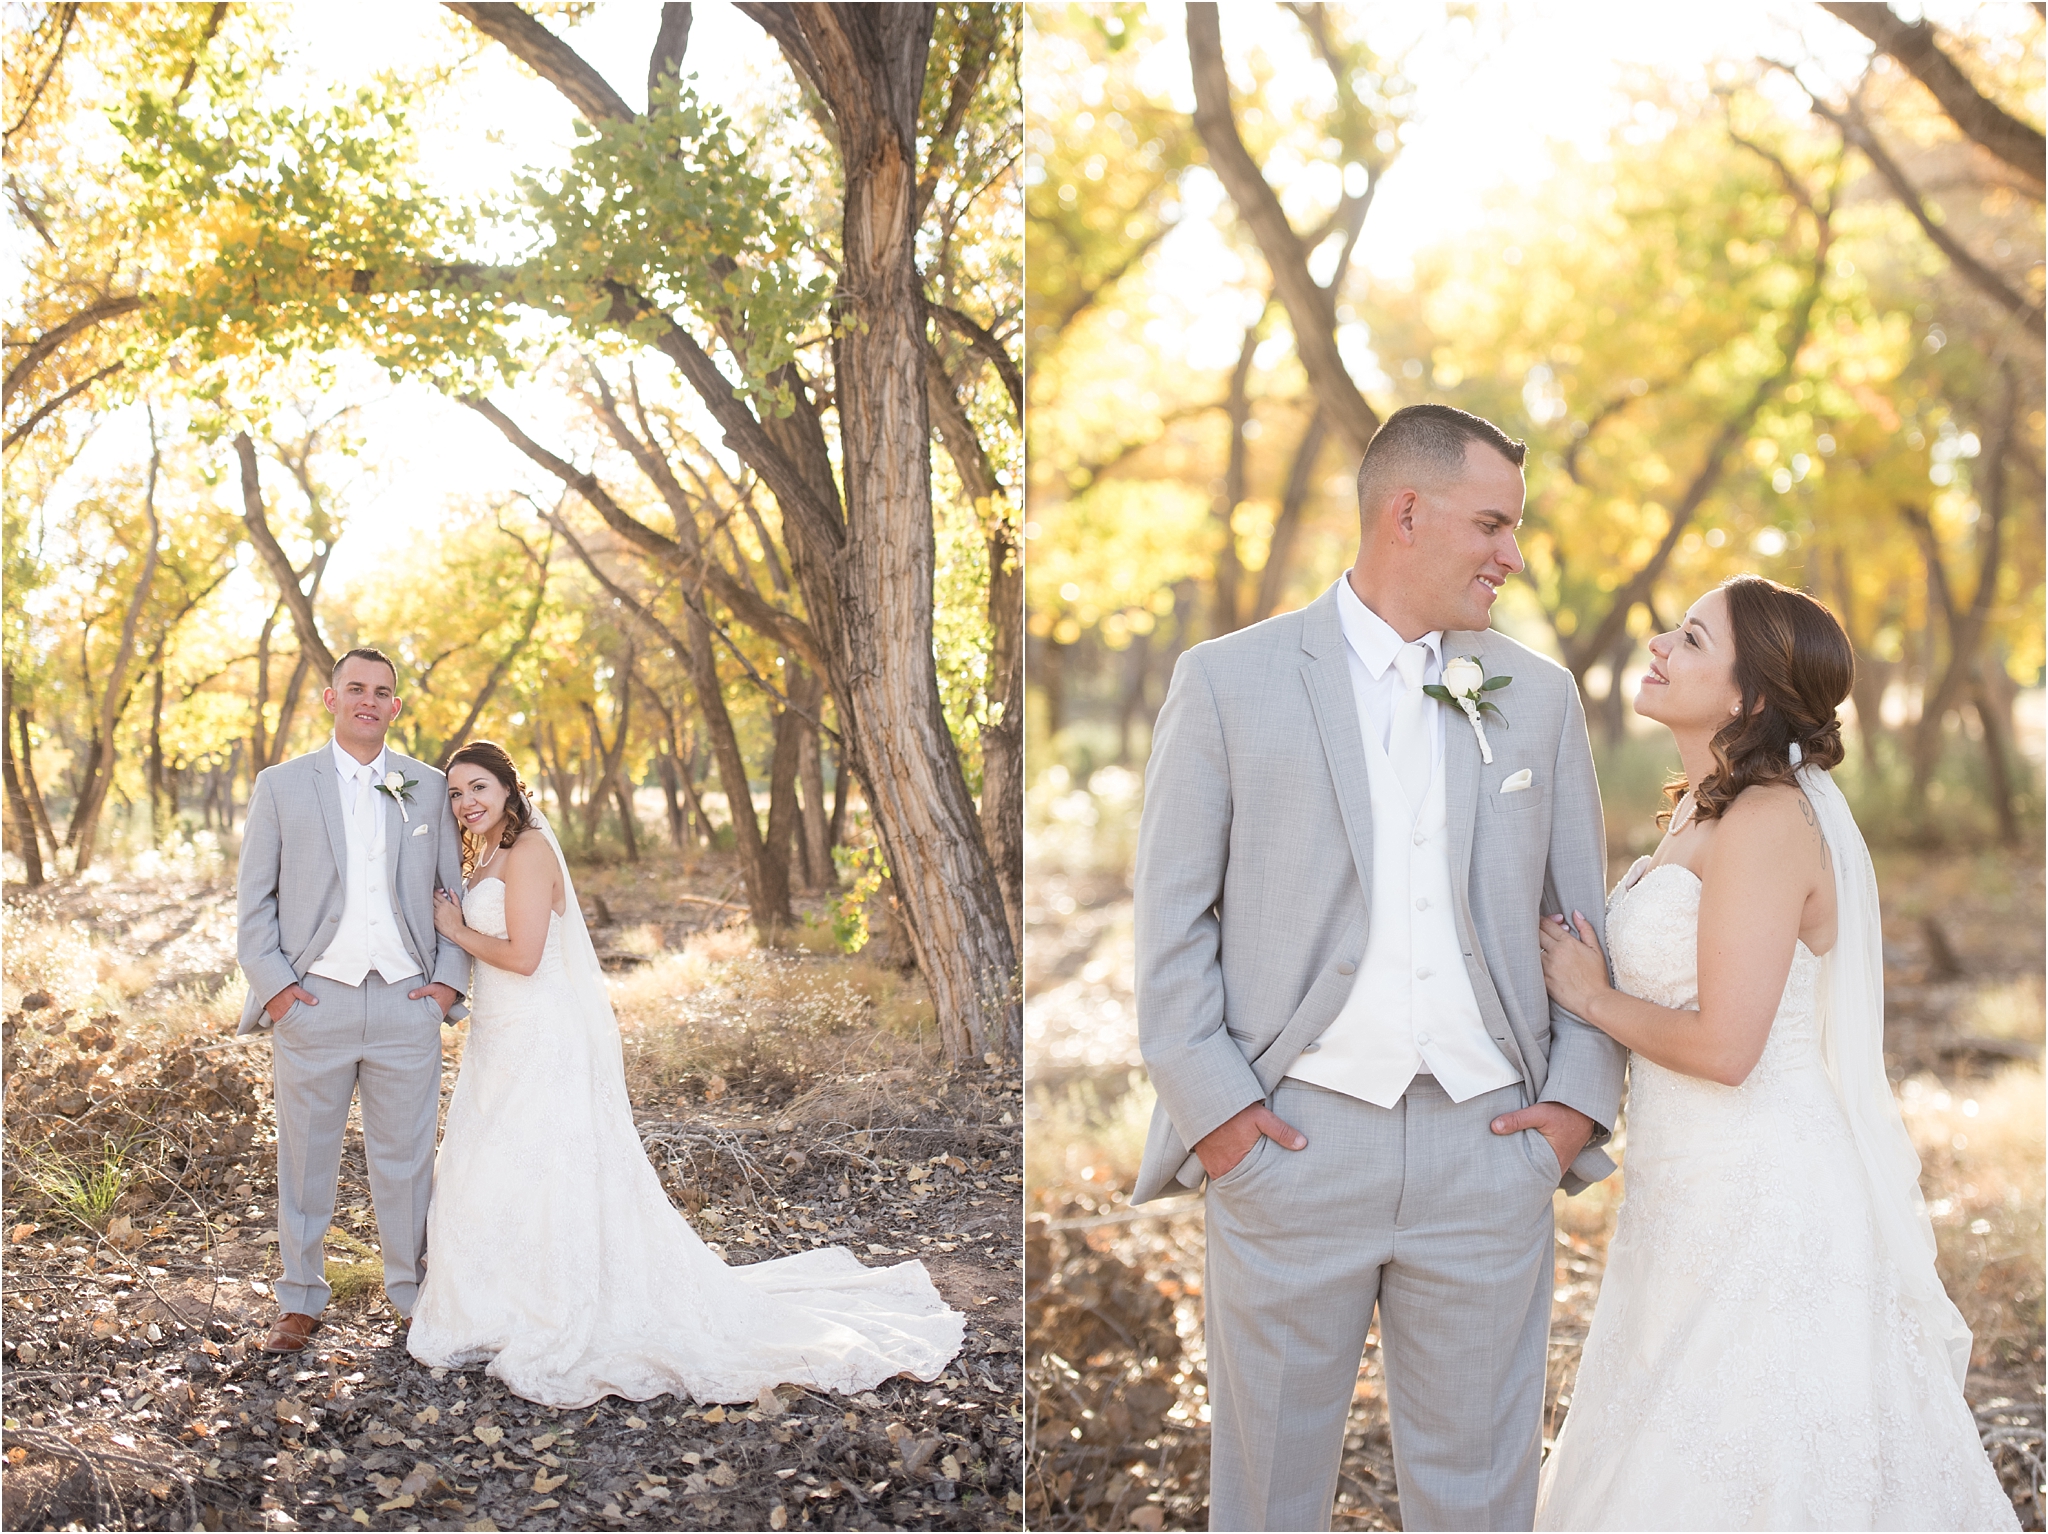 kayla kitts photography - albuquerque wedding photographer - hairpins and scissors - a cake odyssey - new mexico wedding photographer_0052.jpg